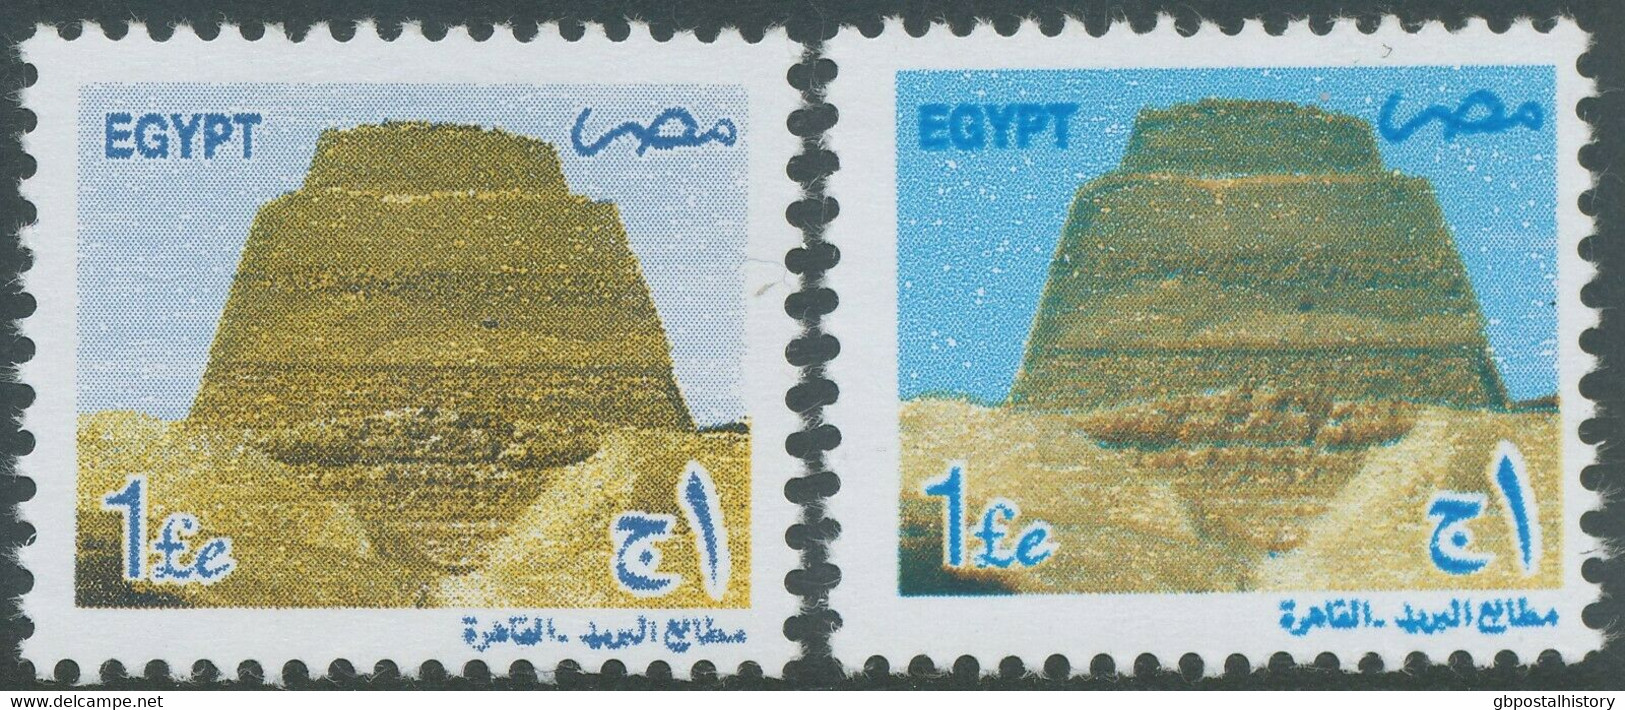 EGYPT 2002/5 Pyramid Of Snofru 1 Egyptian Pound, Two Superb U/M Stamps, VARIETY - Unused Stamps